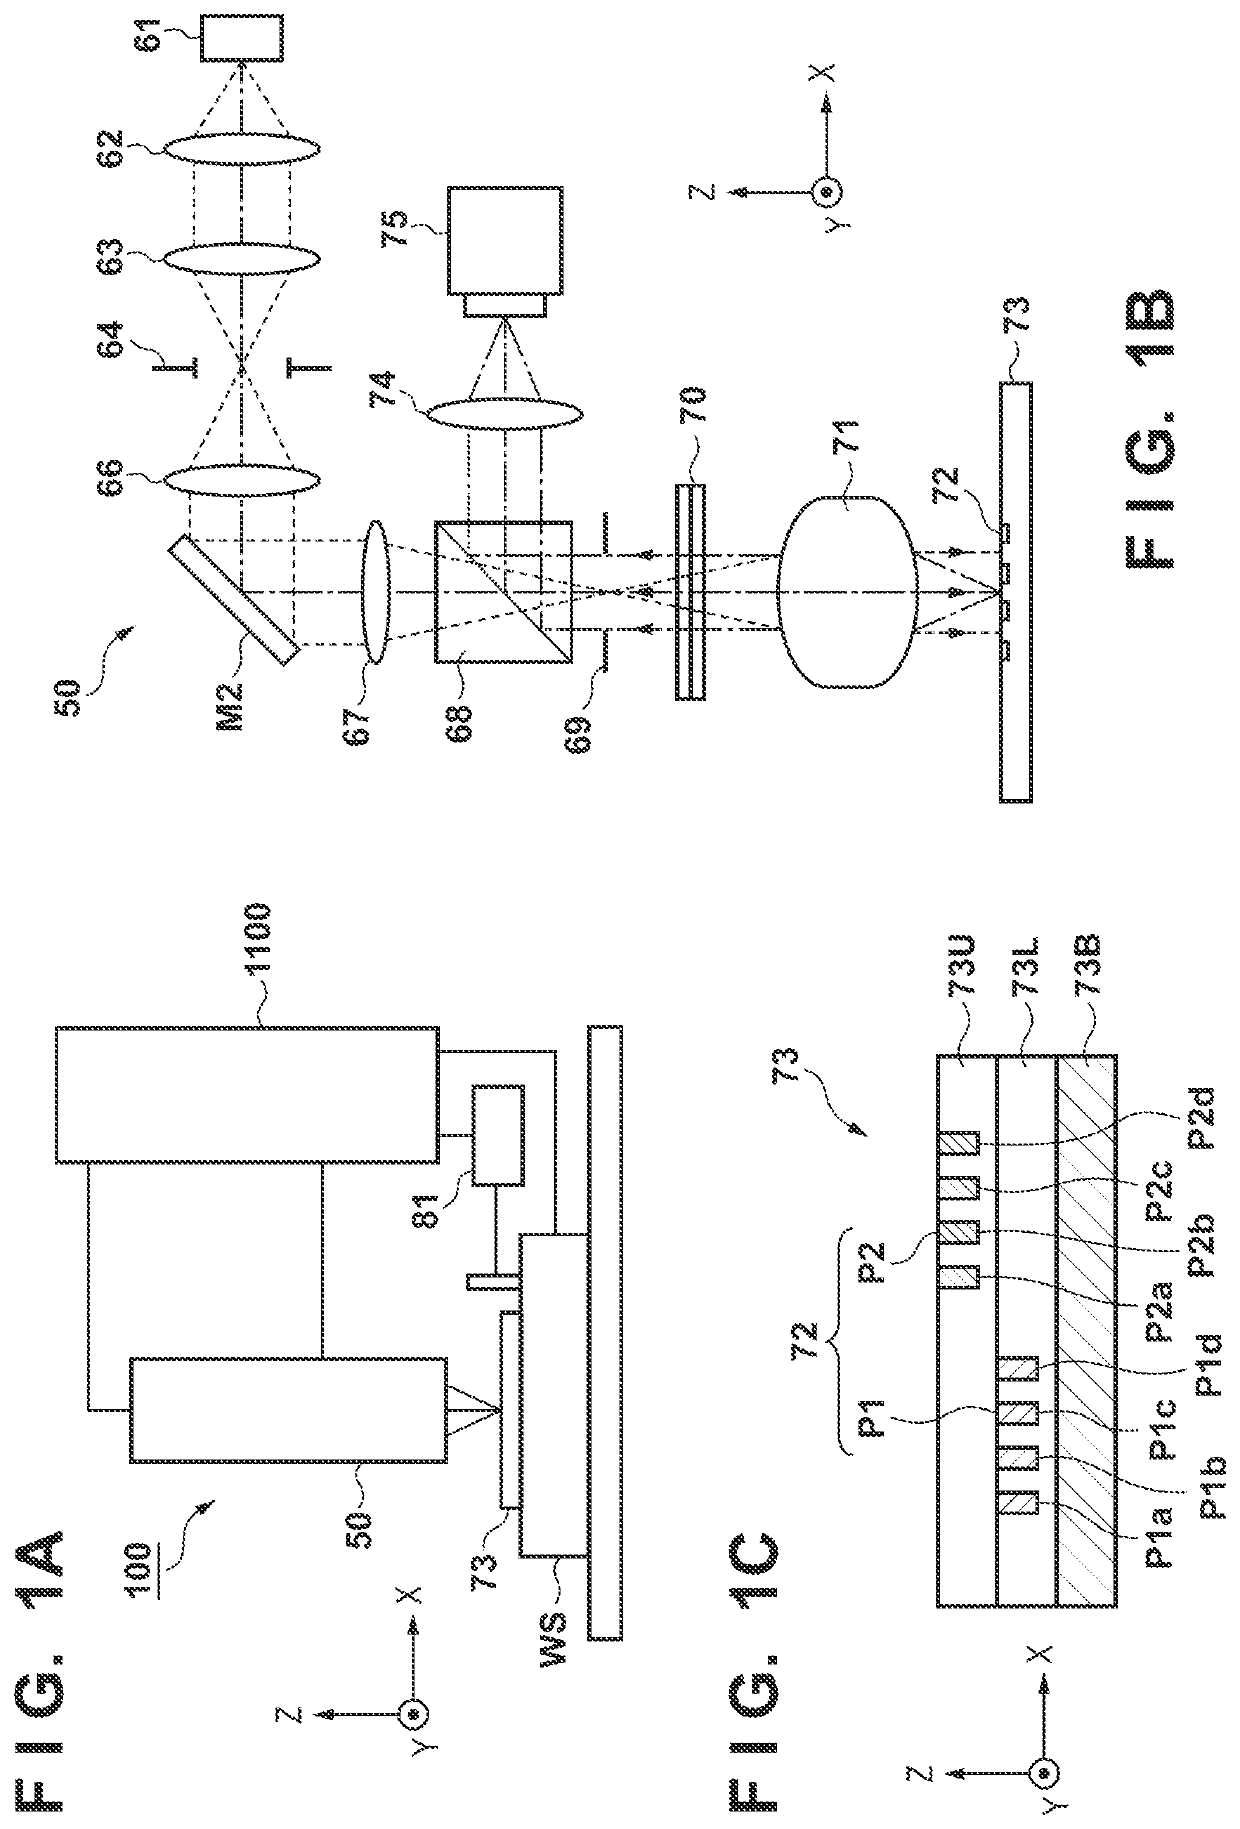 Measurement apparatus, lithography apparatus and article manufacturing method